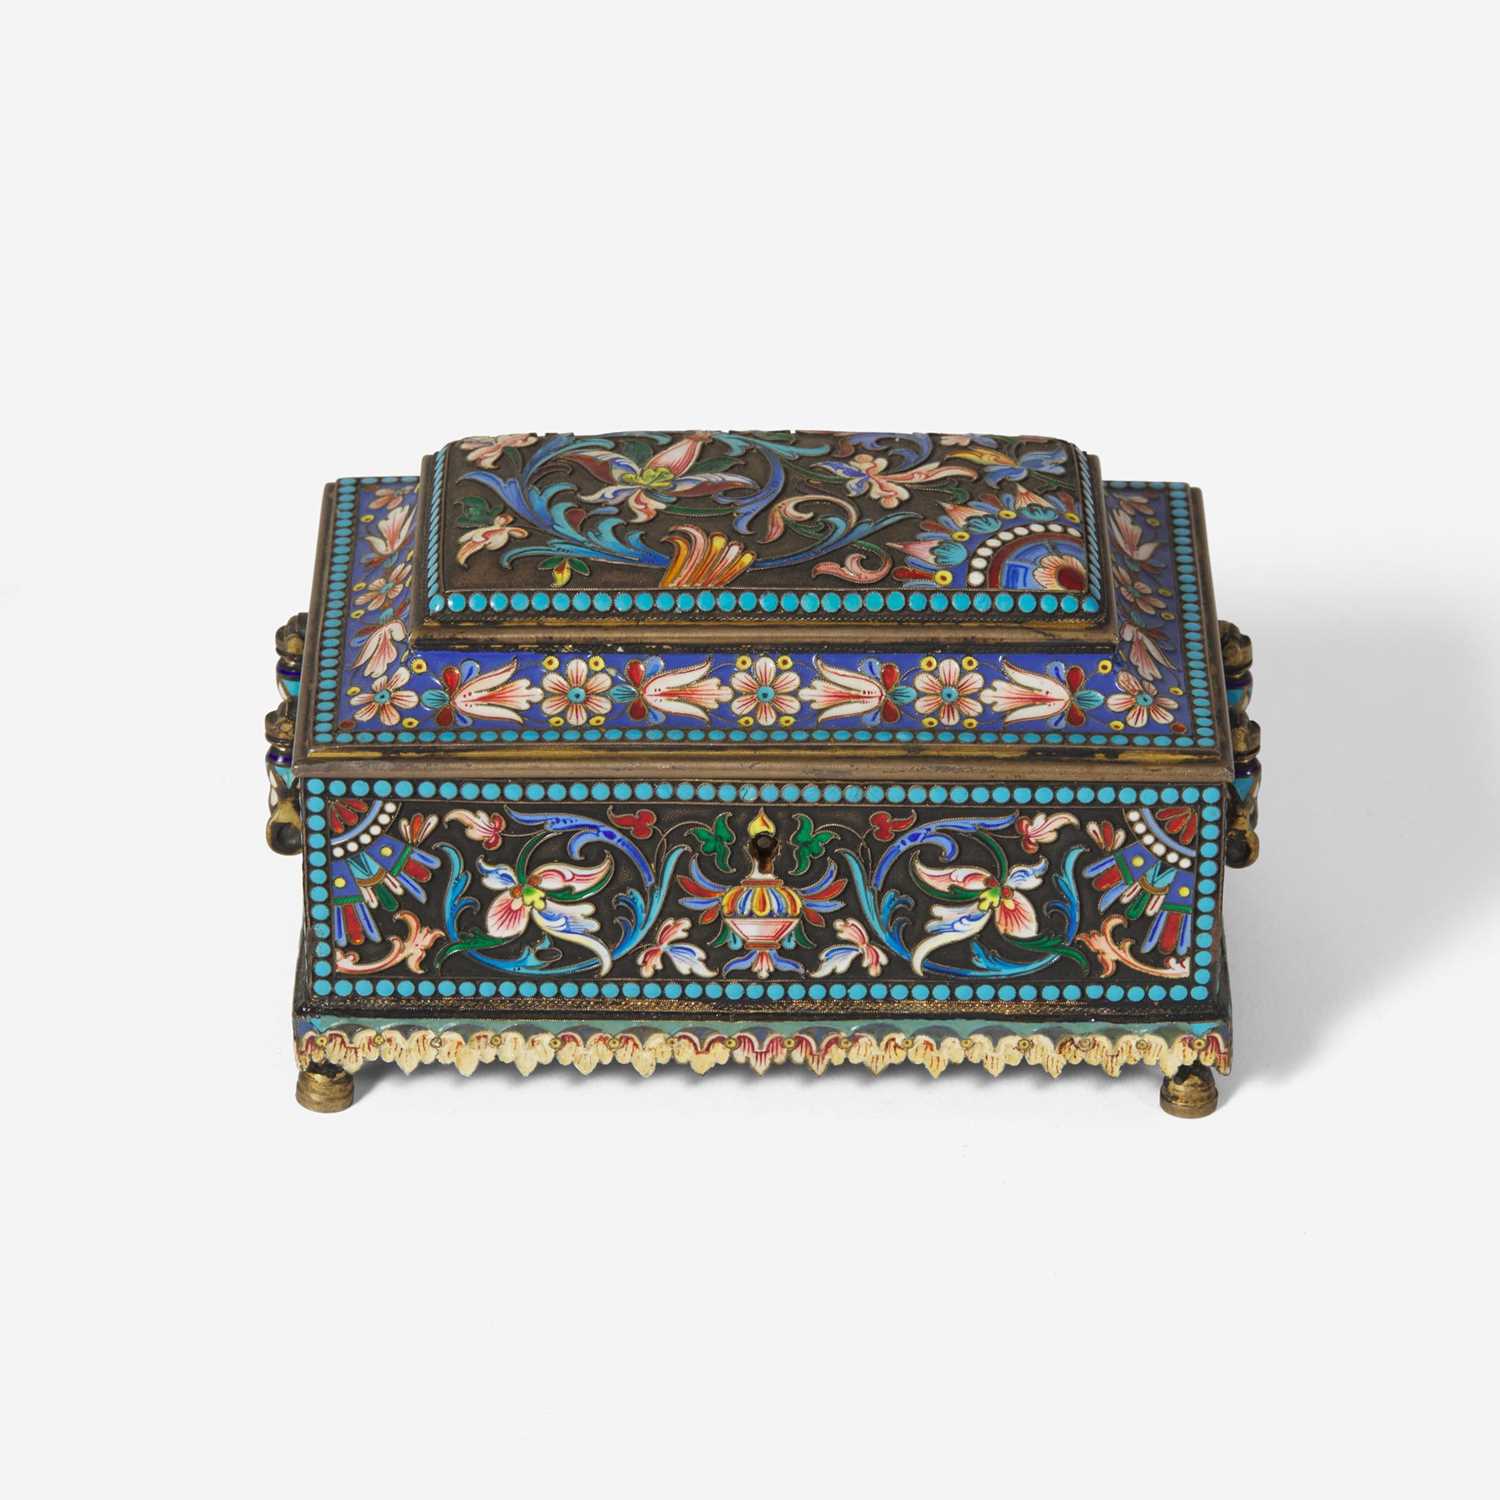 Lot 62 - A Russian silver-gilt and shaded enamel casket